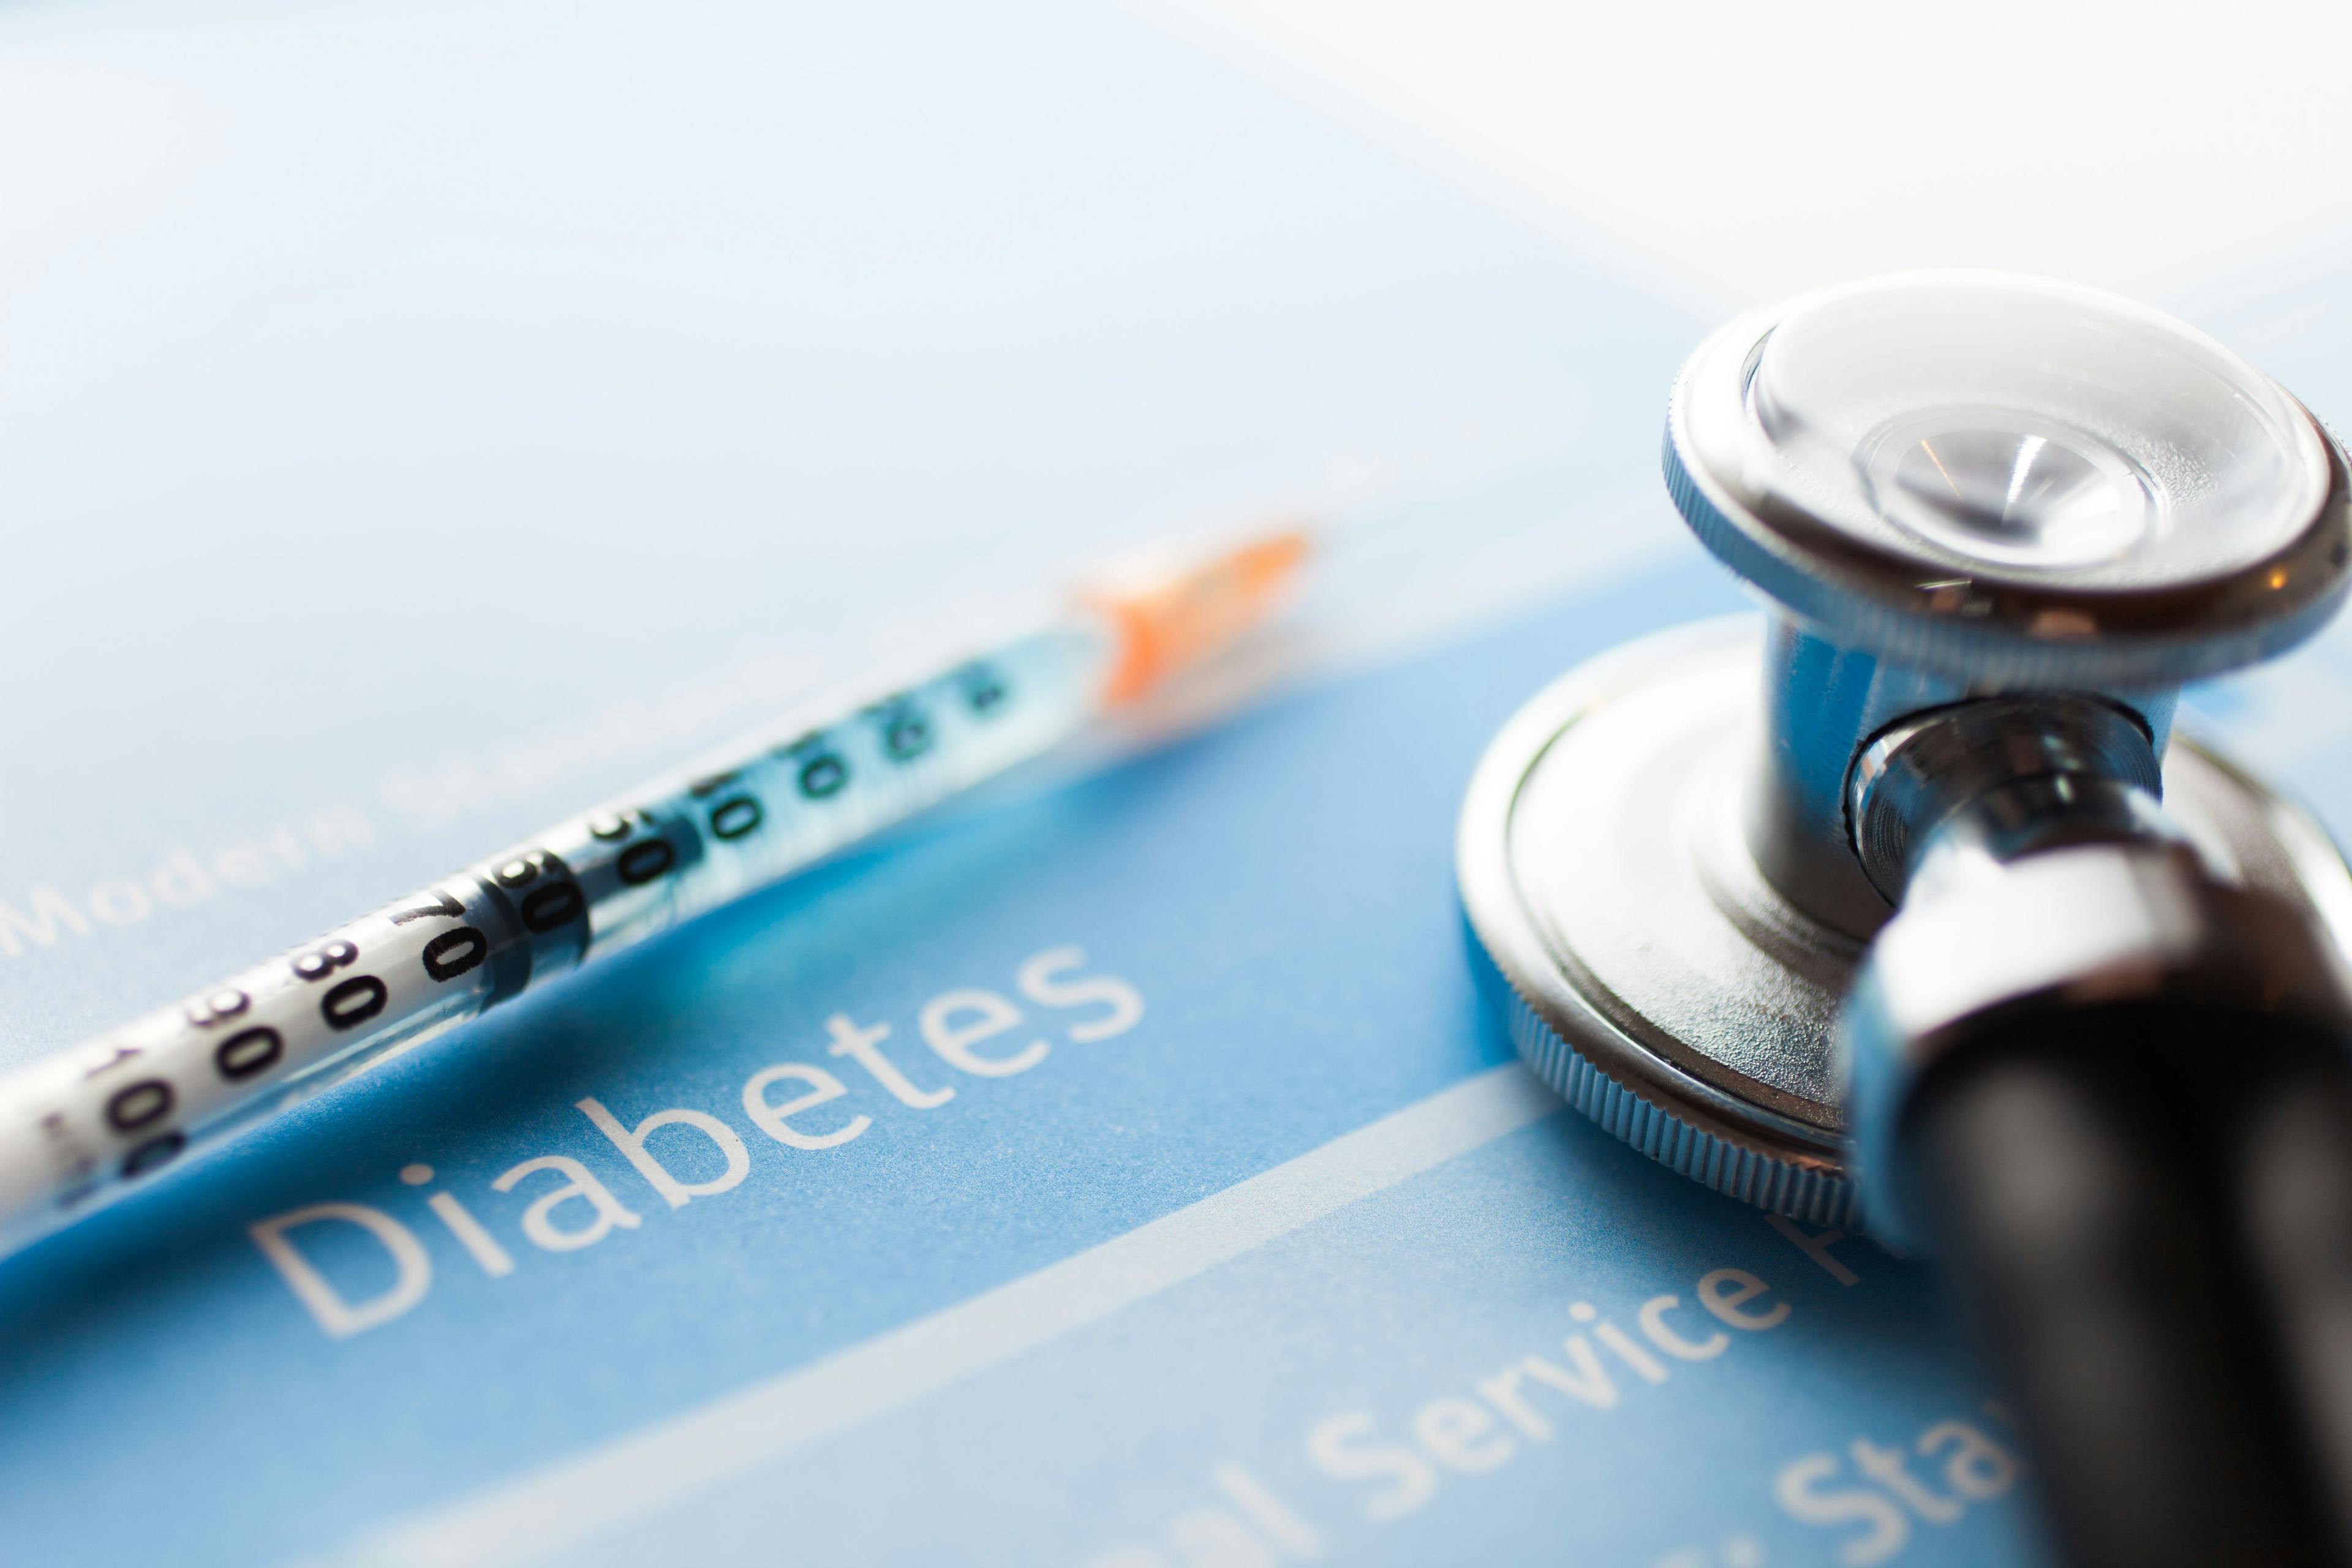 Expert: Diabetes Puts Patients at ‘Greater Risk of Infection, Poor Outcomes From Flu, COVID-19’